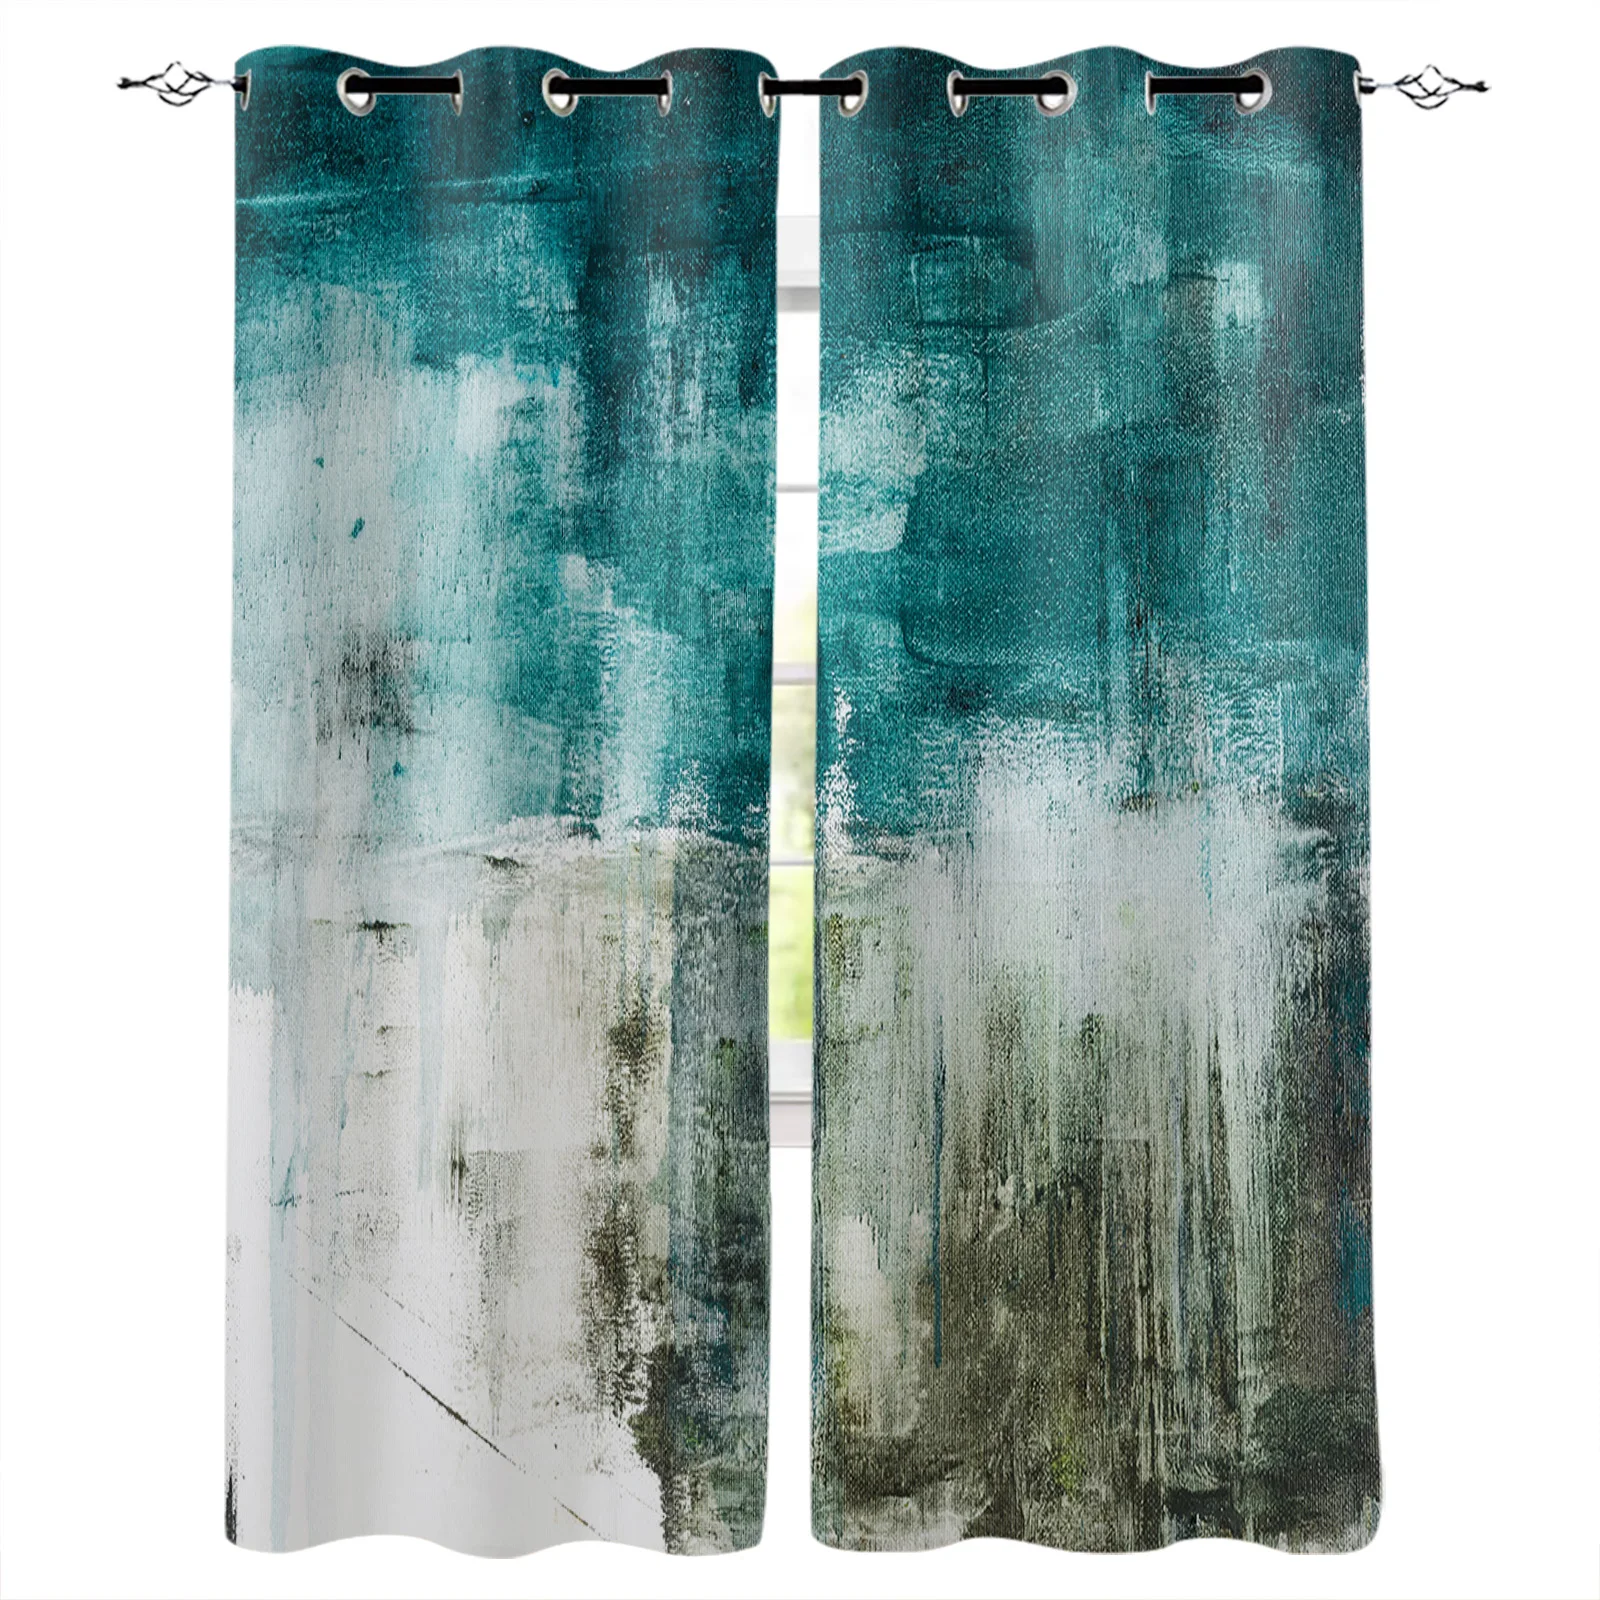 

Abstract Art Ocean Oil Painting Style Curtains for Living Room Kids Bedroom Window Curtain Balcony Hall Drape Long Cortinas